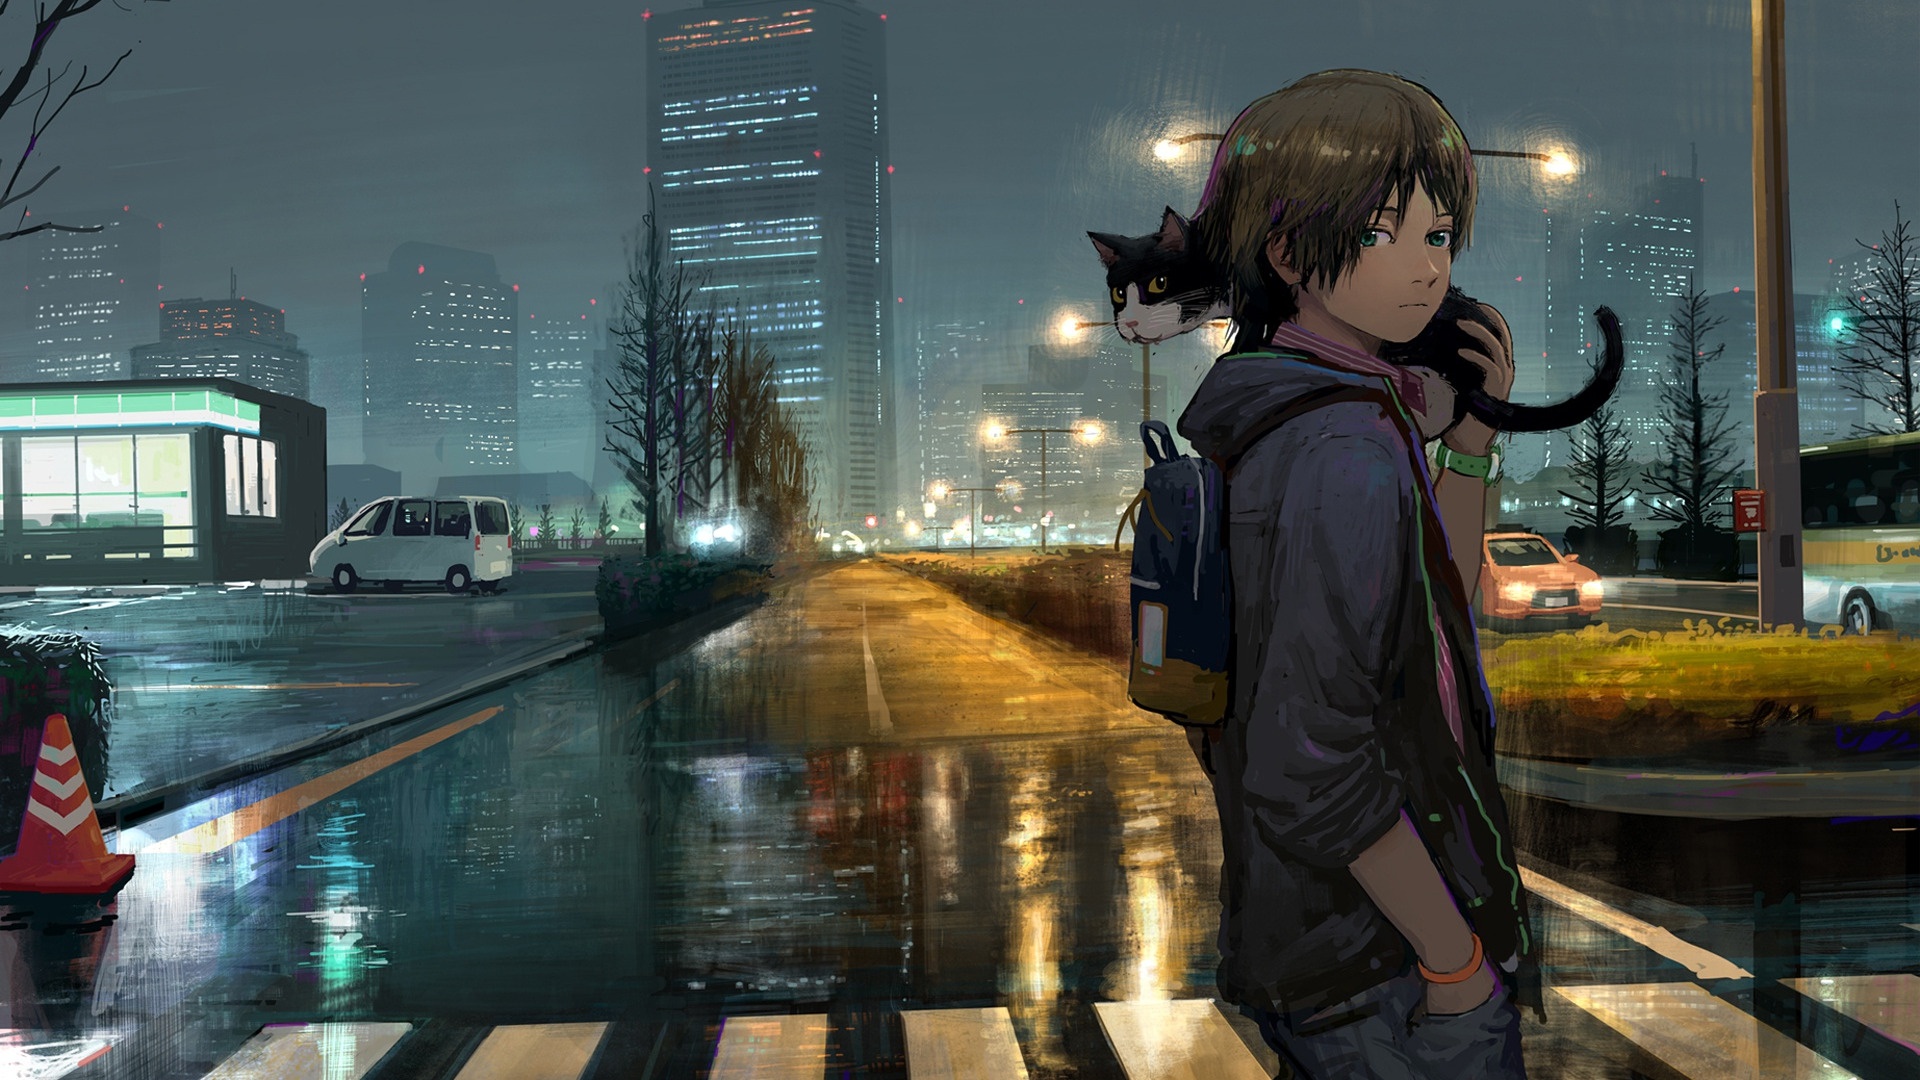 Loneliness Anime City cool wallpaper